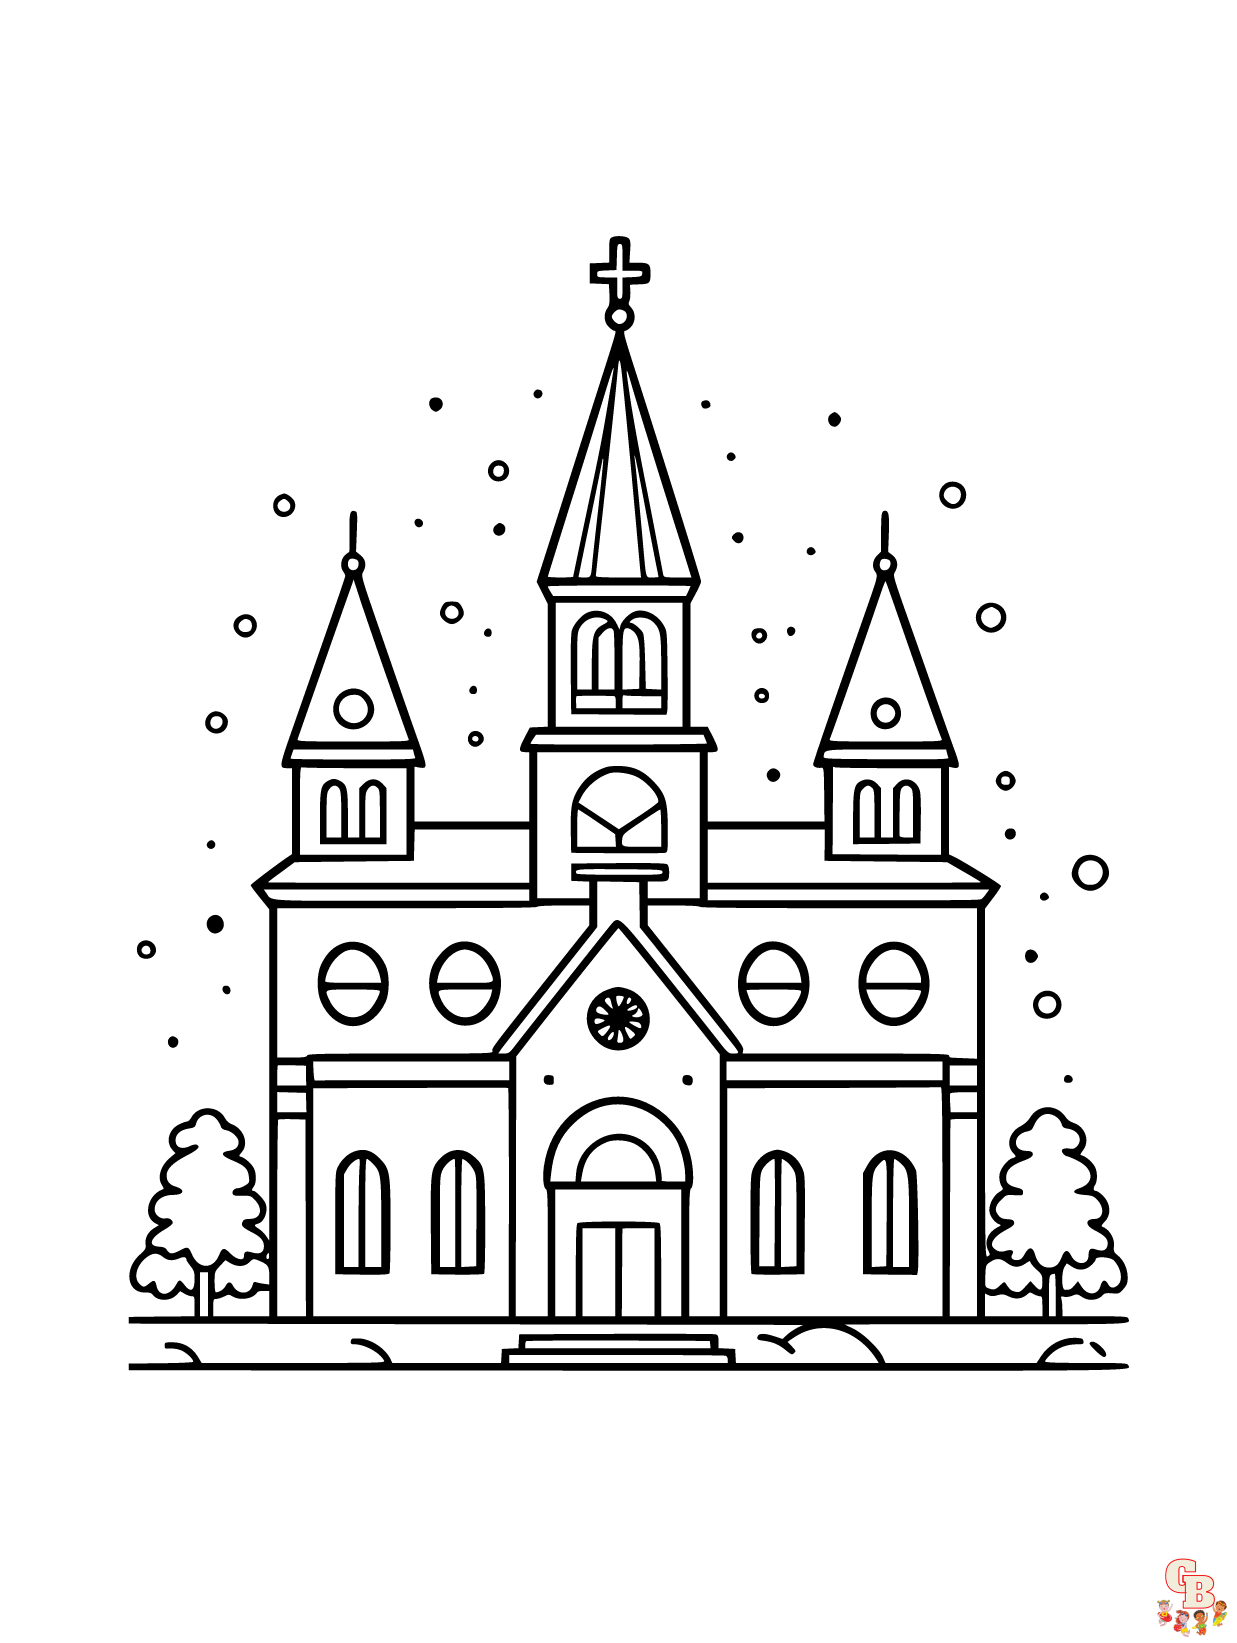 Church Coloring Pages Coloring Pages Printable, Free, and Easy